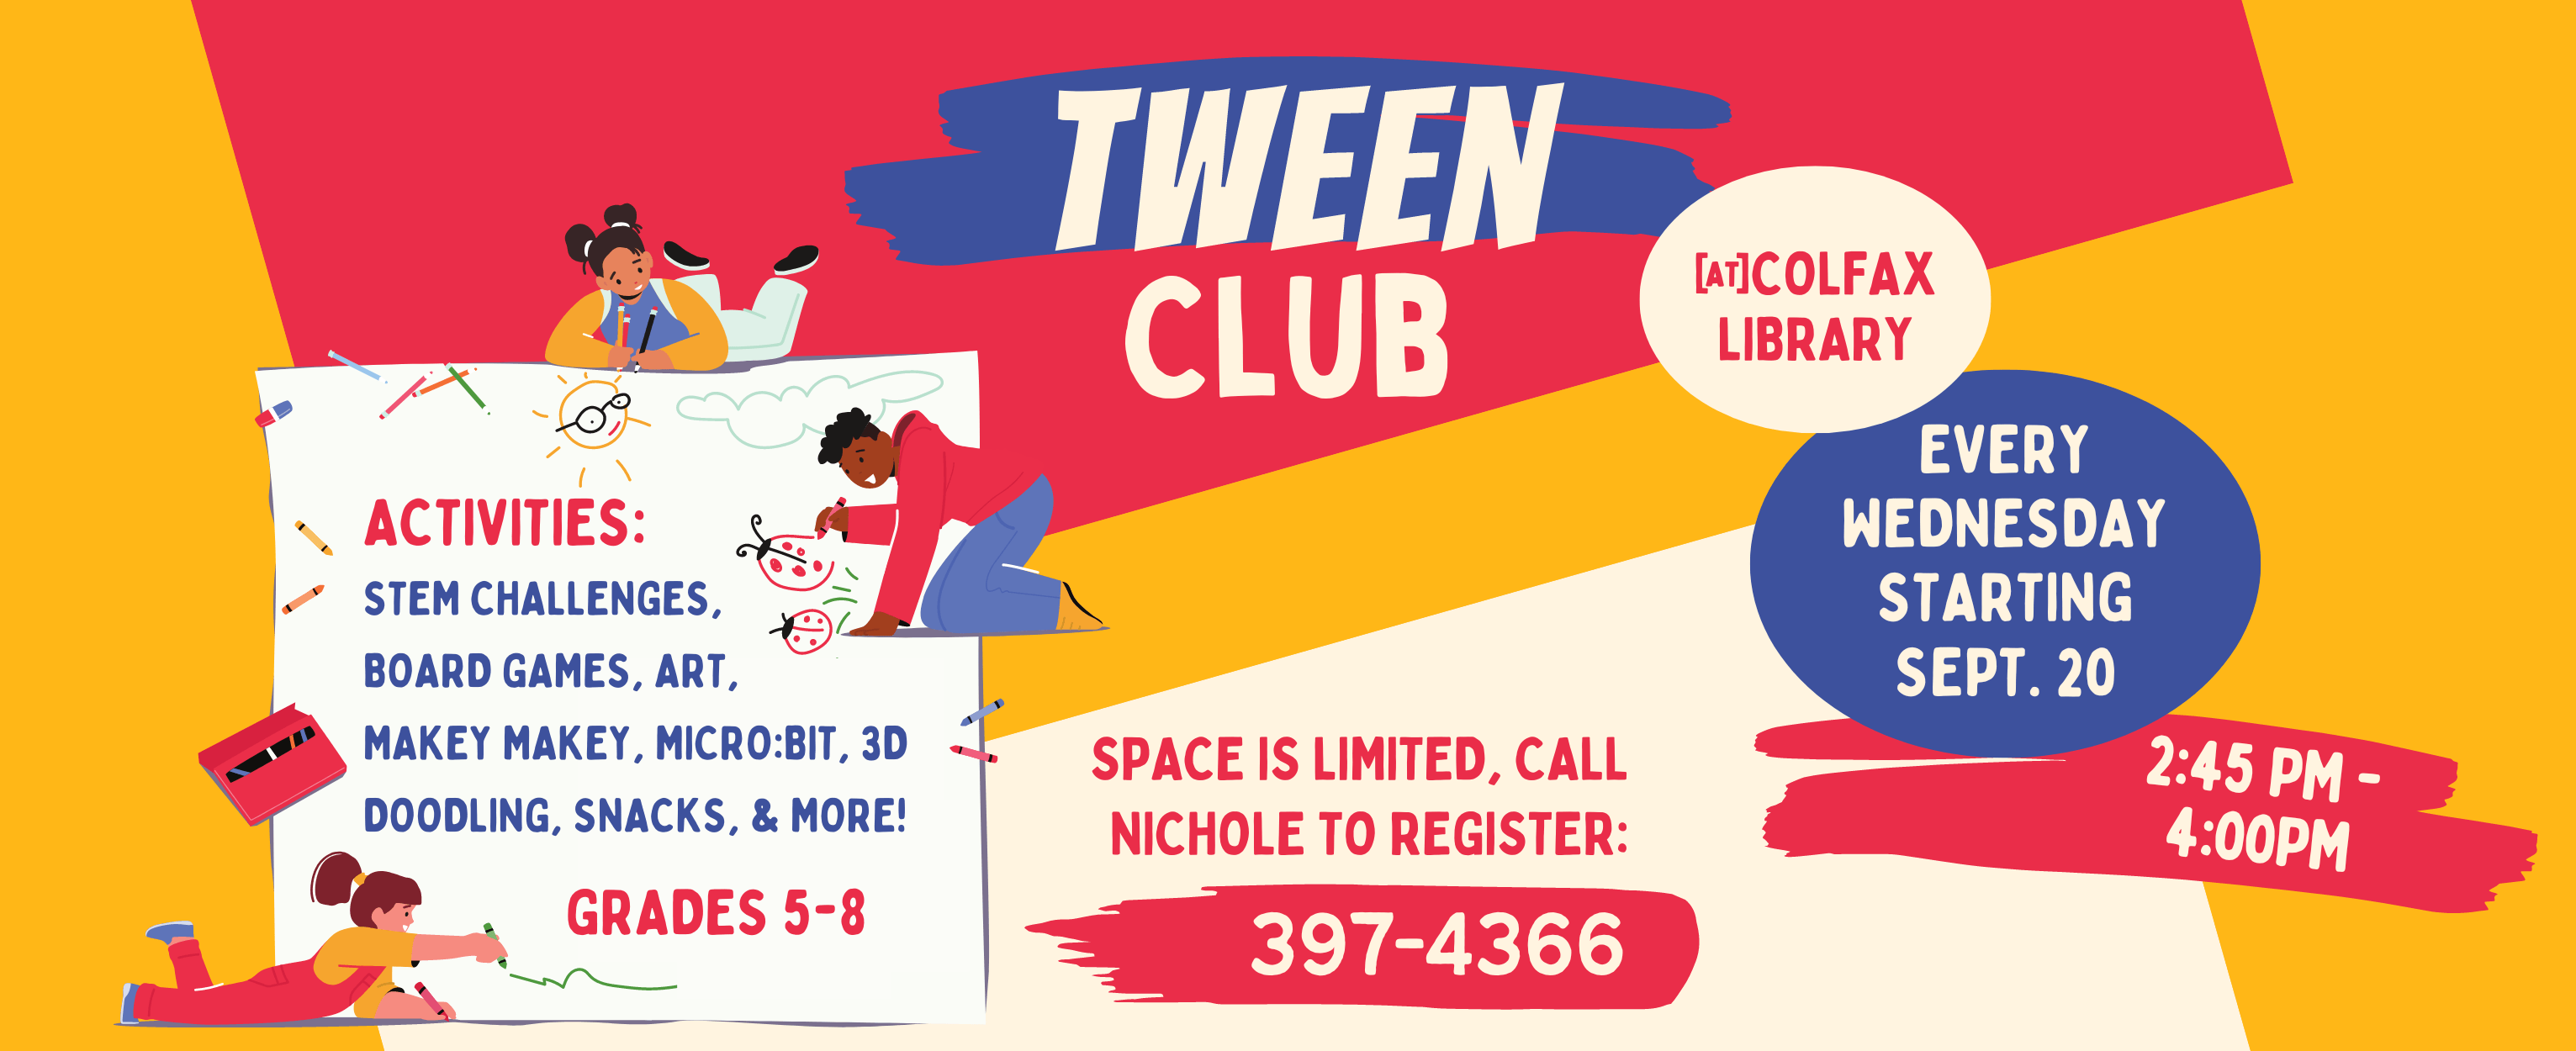 Tween Club starts Wednesday, September 20 at the Colfax Library! RSVP required, as space and snacks are limited. Call the library to register.